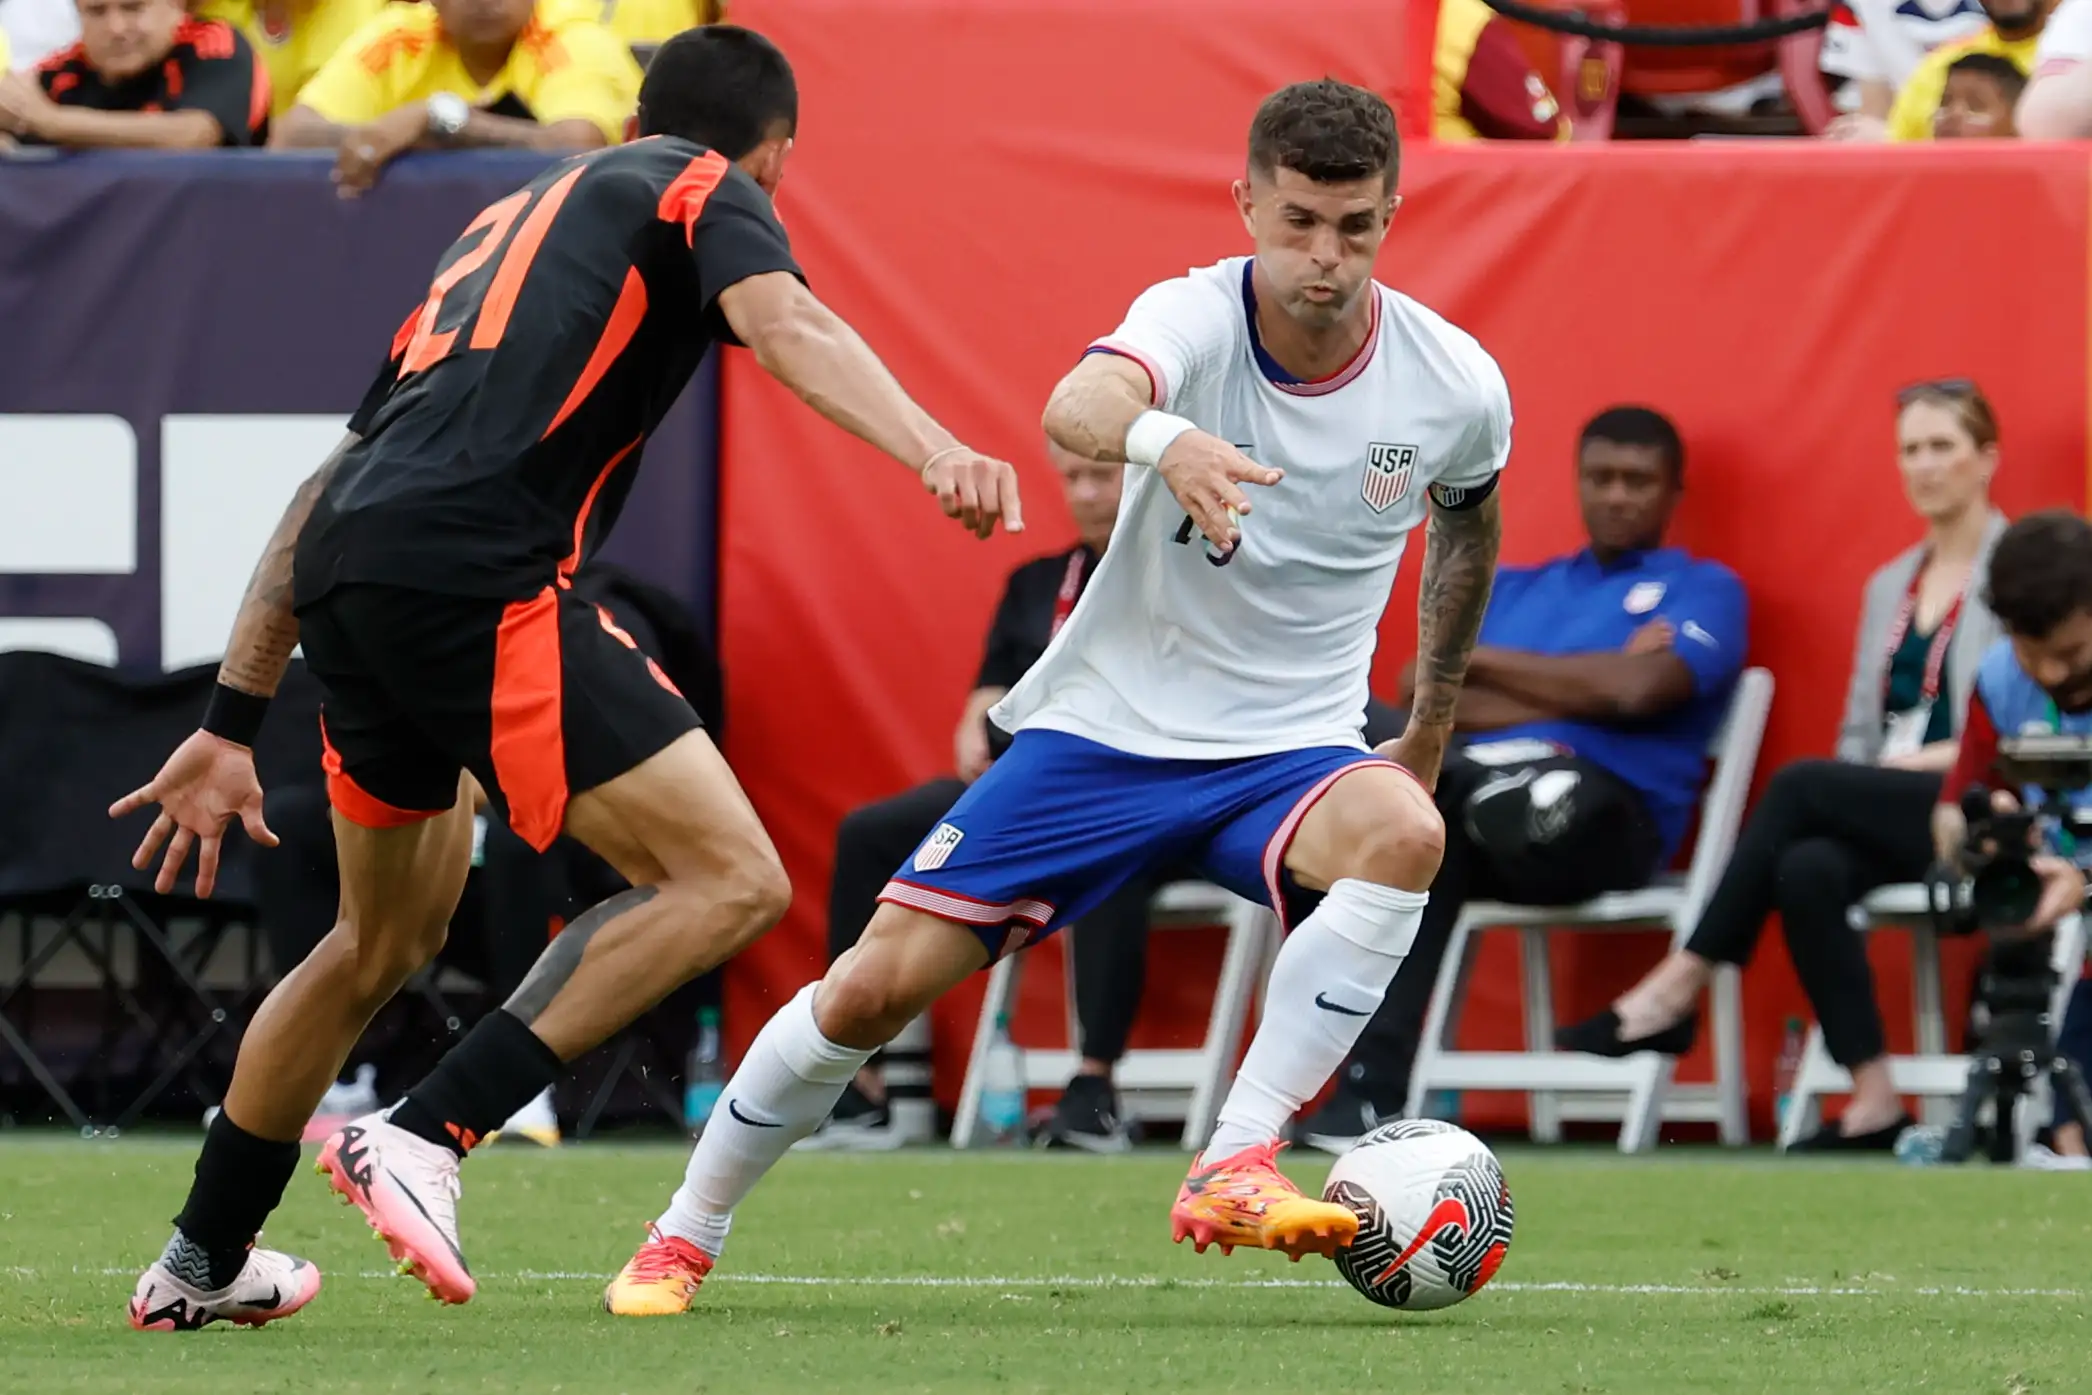 United States forward Christian Pulisic (10) dribbles the ball as Colombia defender Daniel Munoz (21) defends in the first half at Commanders Field.